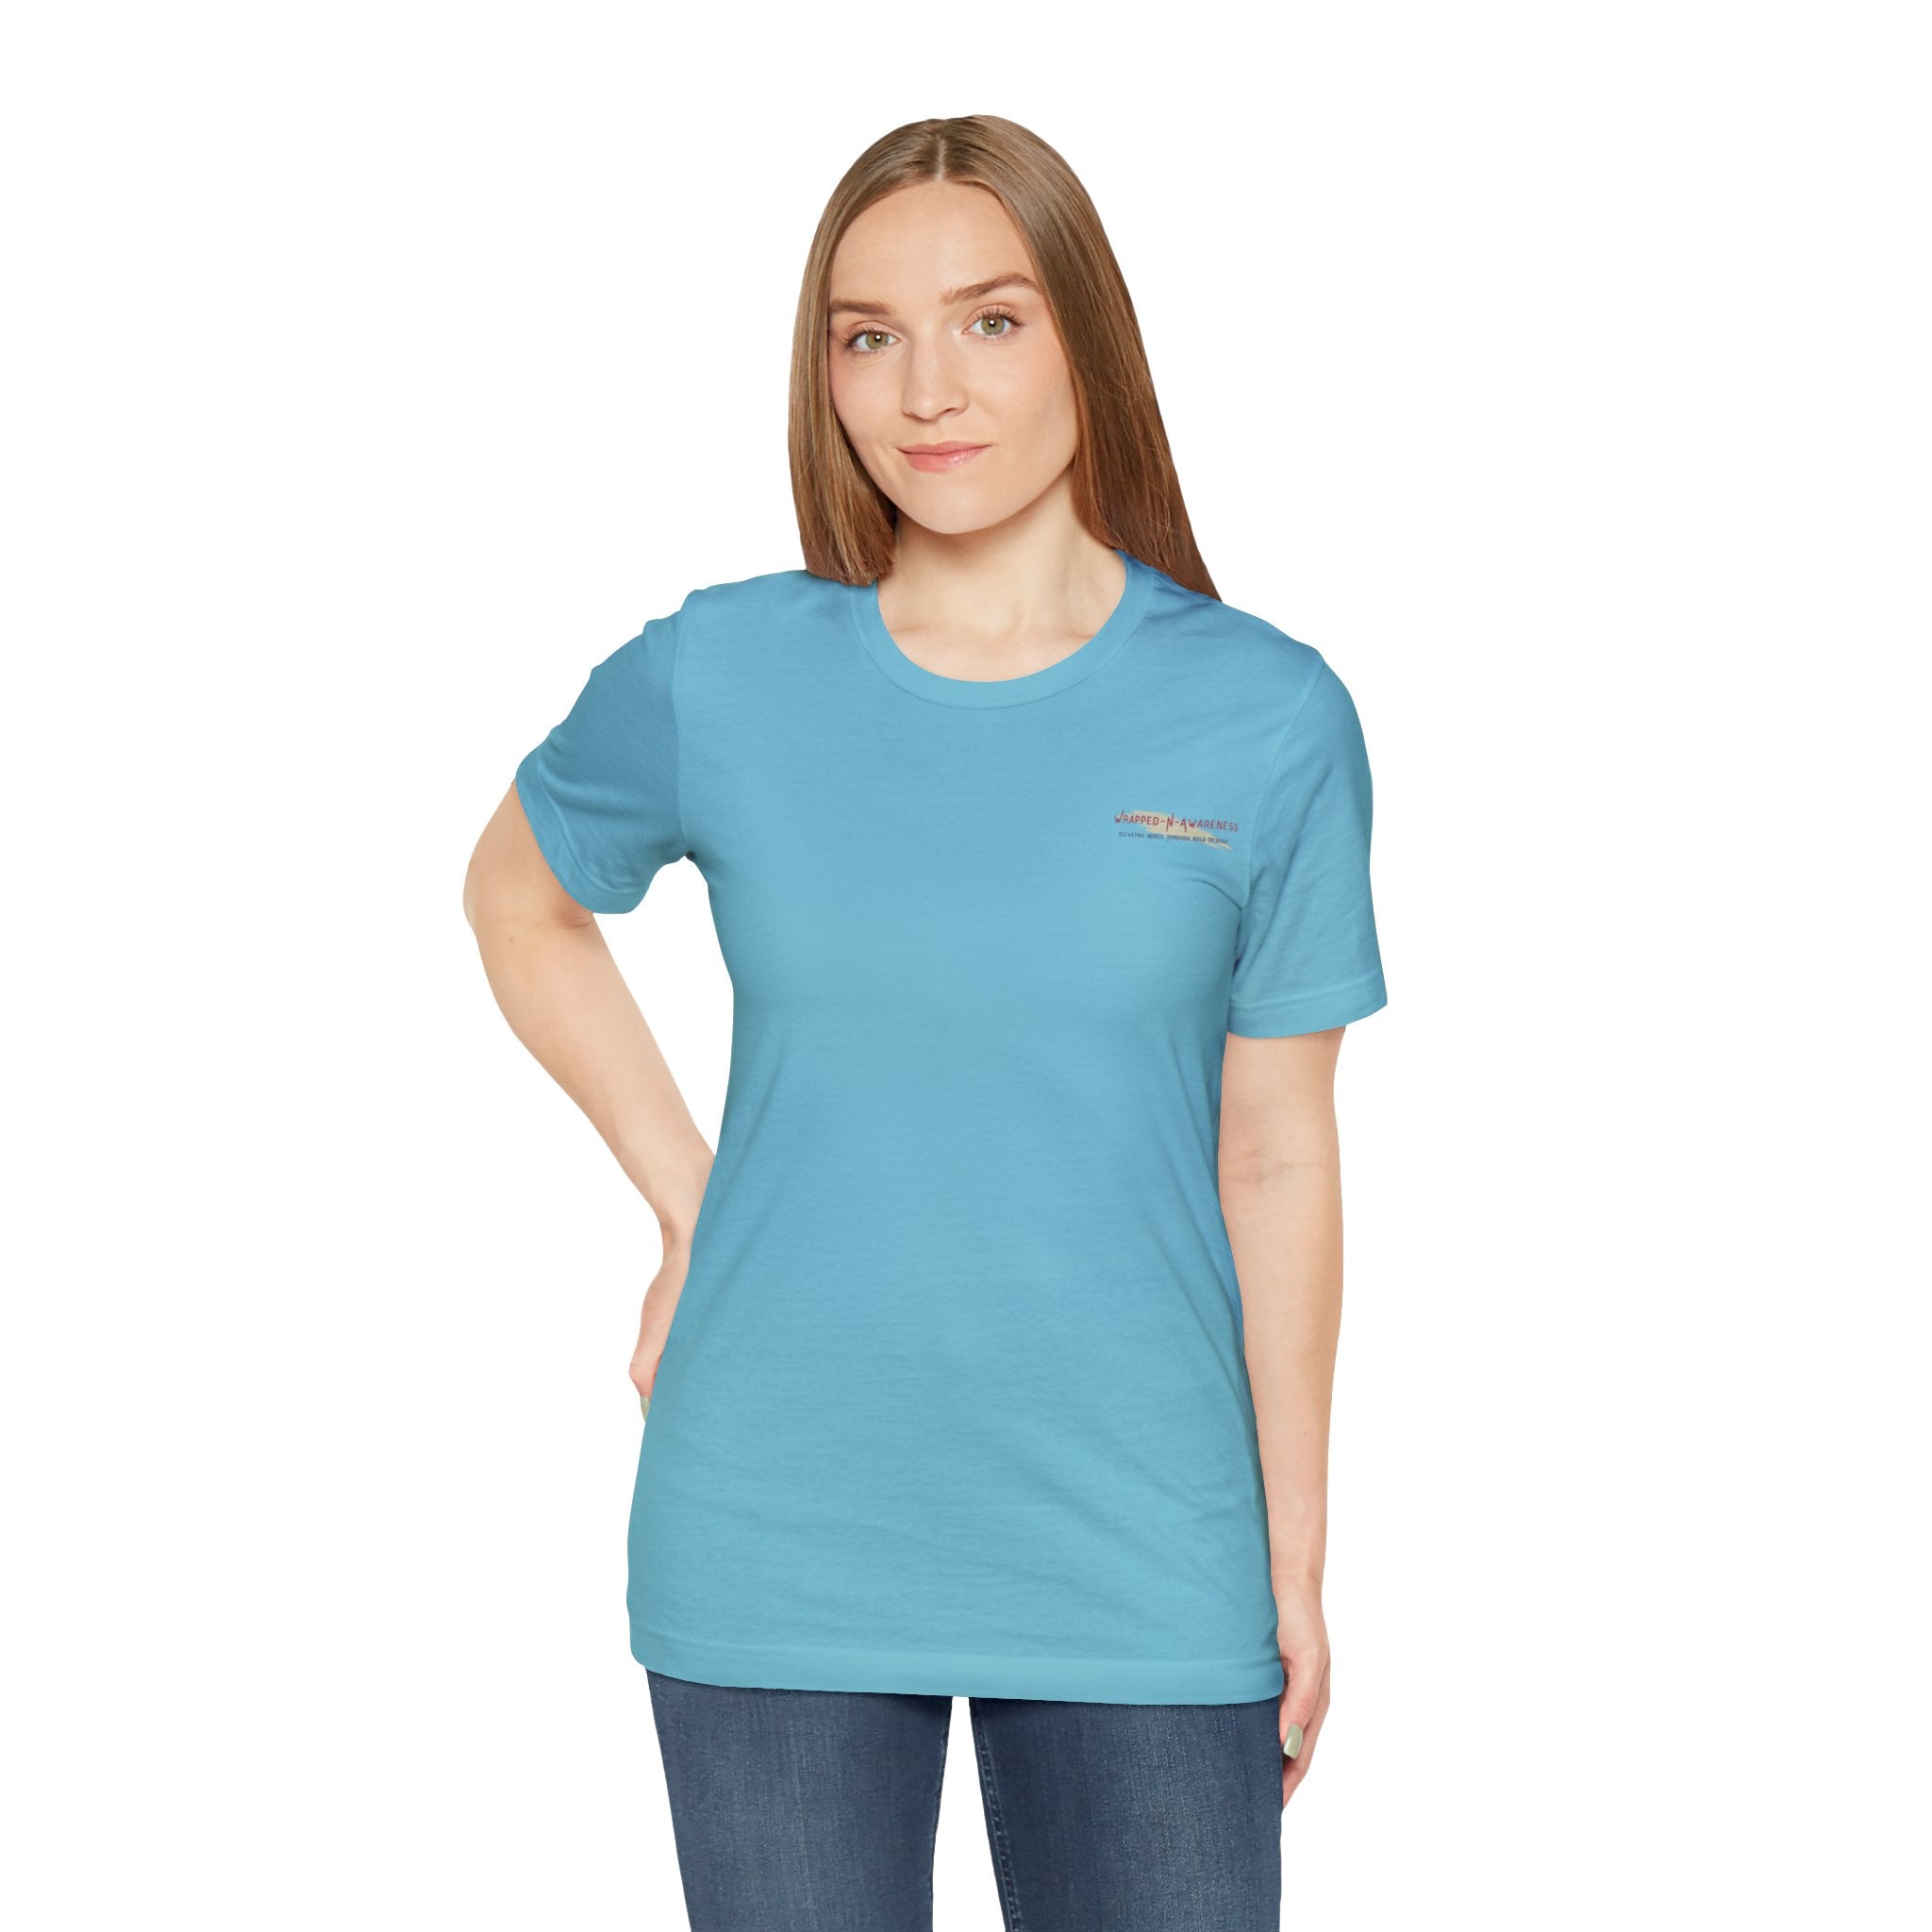 Hope Conquers Fear Jersey Tee - Bella+Canvas 3001 Heather Ice Blue Airlume Cotton Bella+Canvas 3001 Crew Neckline Jersey Short Sleeve Lightweight Fabric Mental Health Support Retail Fit Tear-away Label Tee Unisex Tee T-Shirt 10416752092018989430_2048 Printify